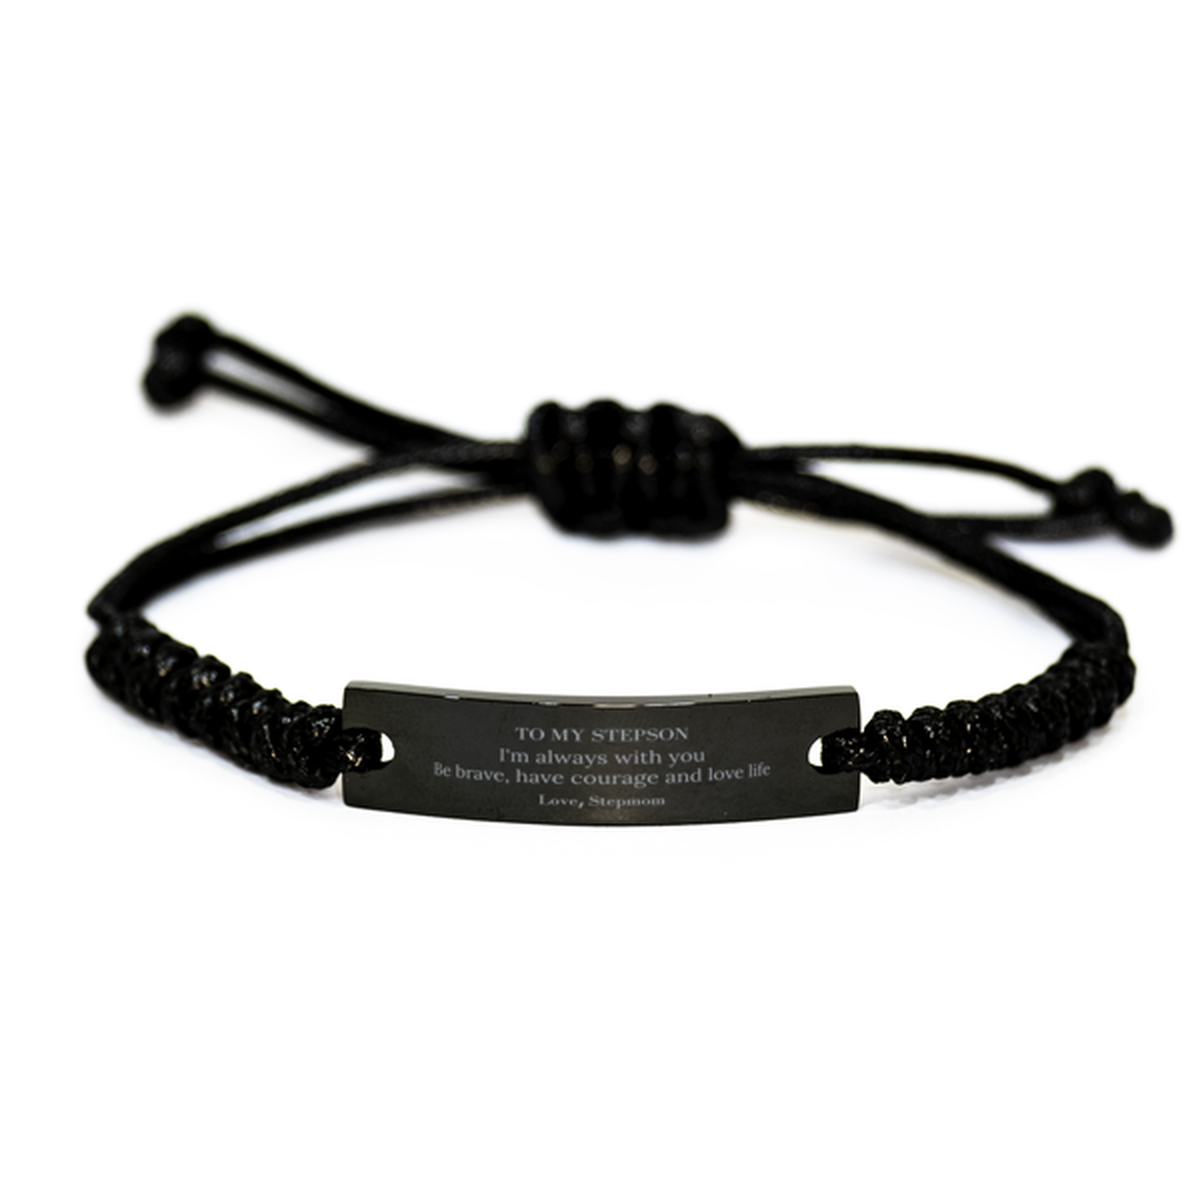 To My Stepson Gifts from Stepmom, Unique Black Rope Bracelet Inspirational Christmas Birthday Graduation Gifts for Stepson I'm always with you. Be brave, have courage and love life. Love, Stepmom